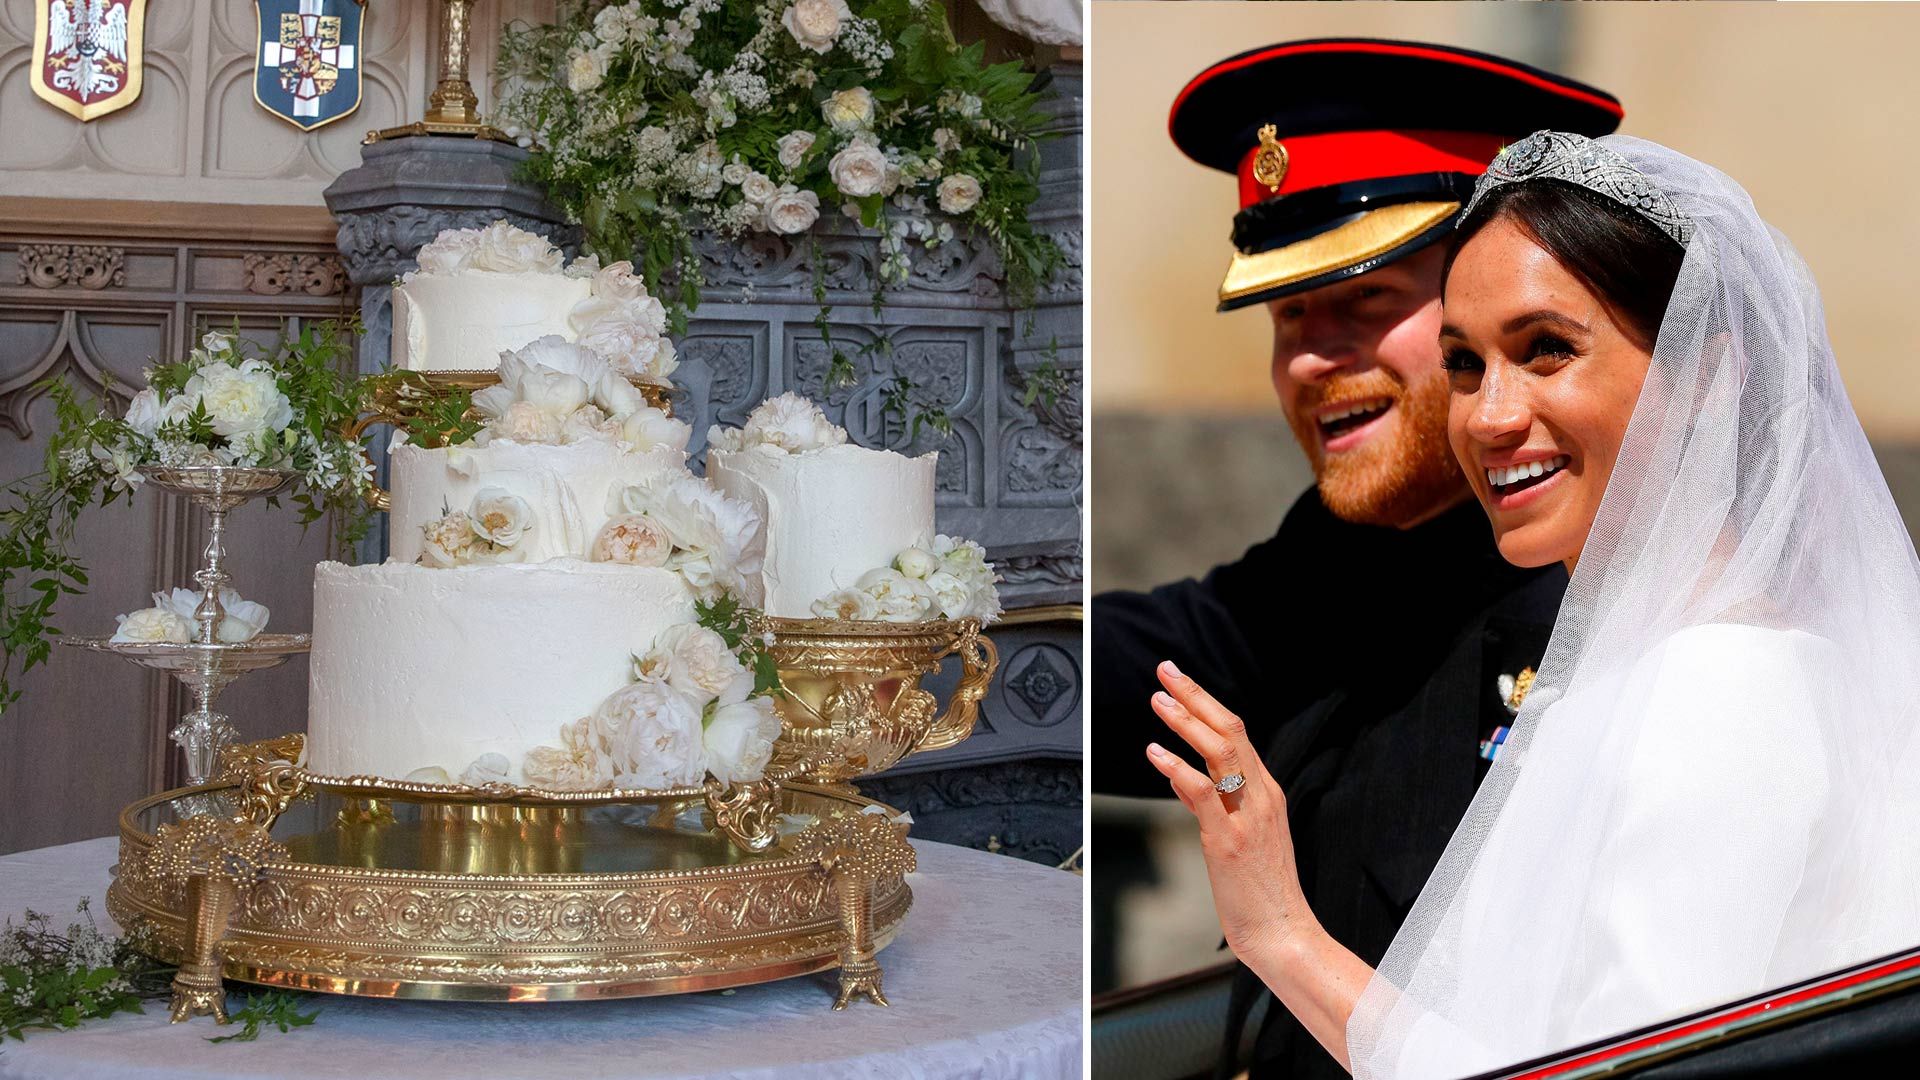 Meghan Markle and Prince Harry smiling on their wedding day next to their wedding cake